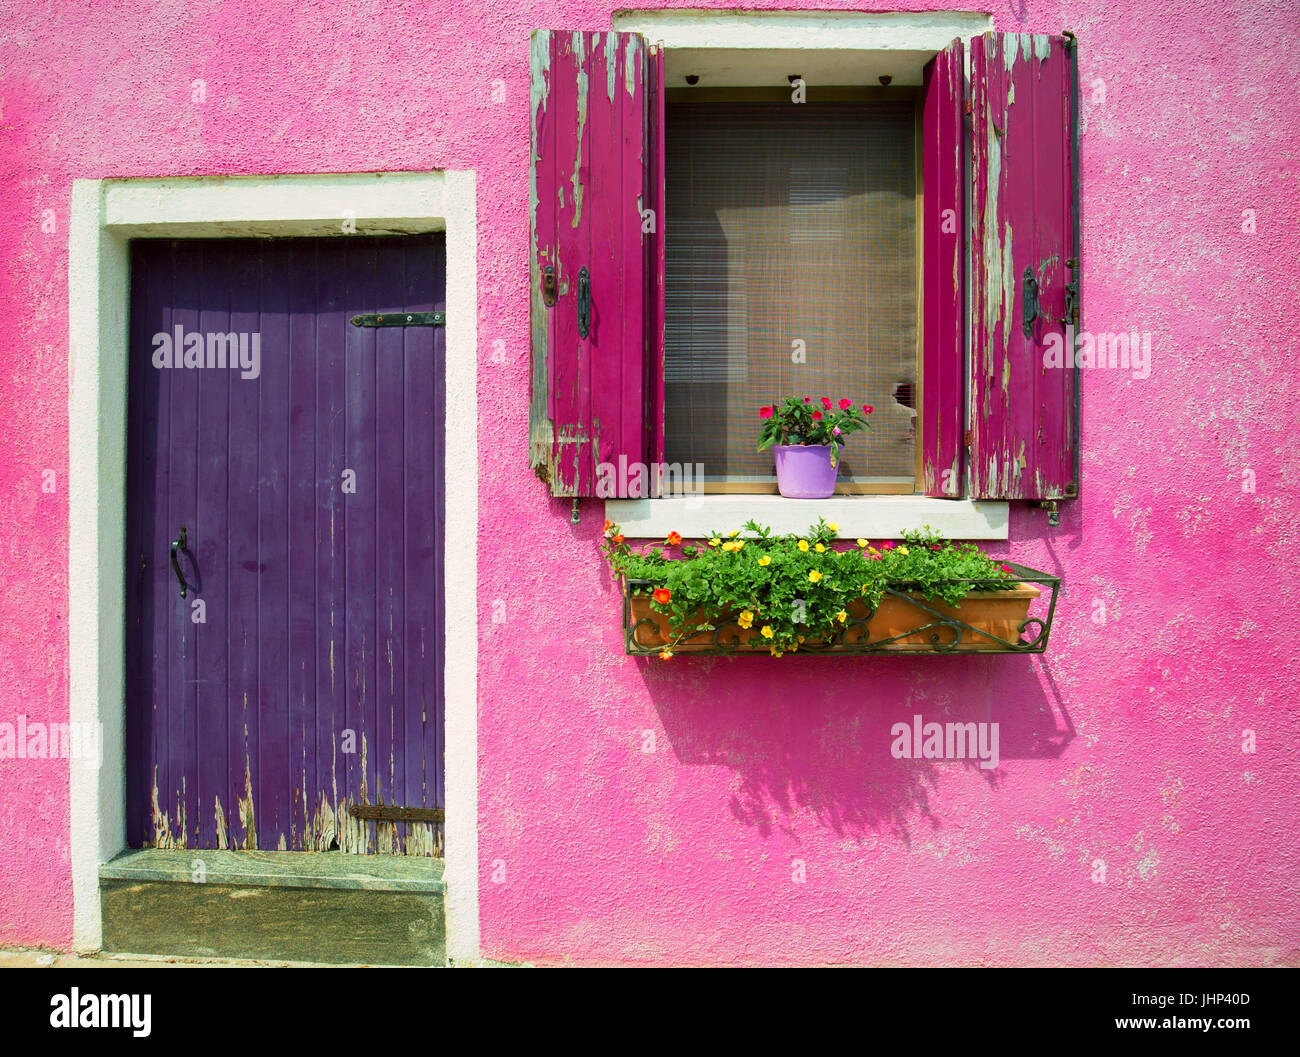 Burano, Venice/ The small yard with bright pink walls of houses Stock Photo